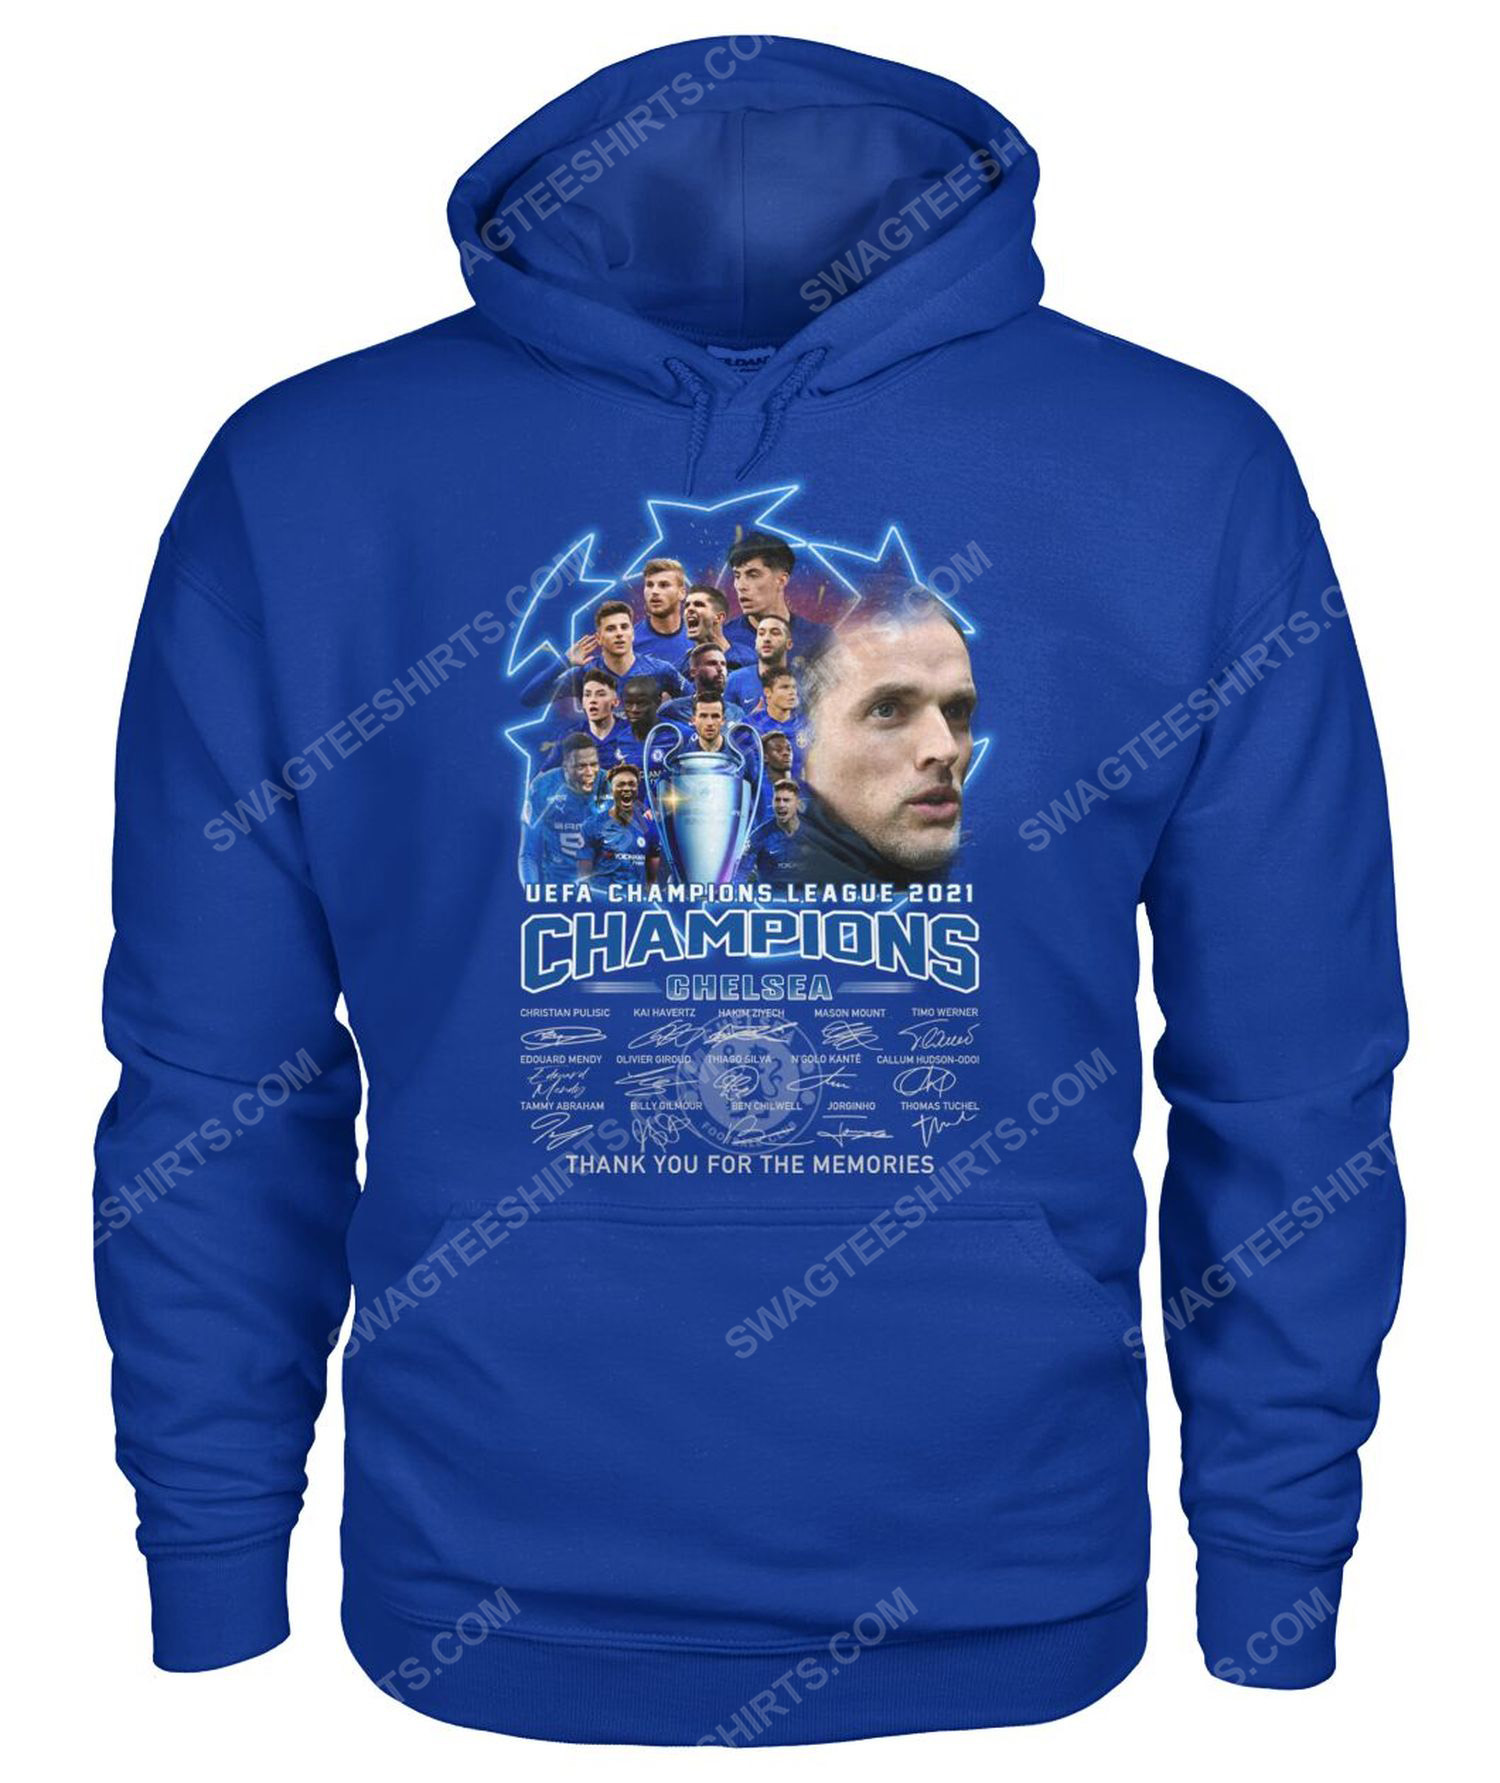 UEFA champions league 2021 chelsea fc thank you for the memories hoodie